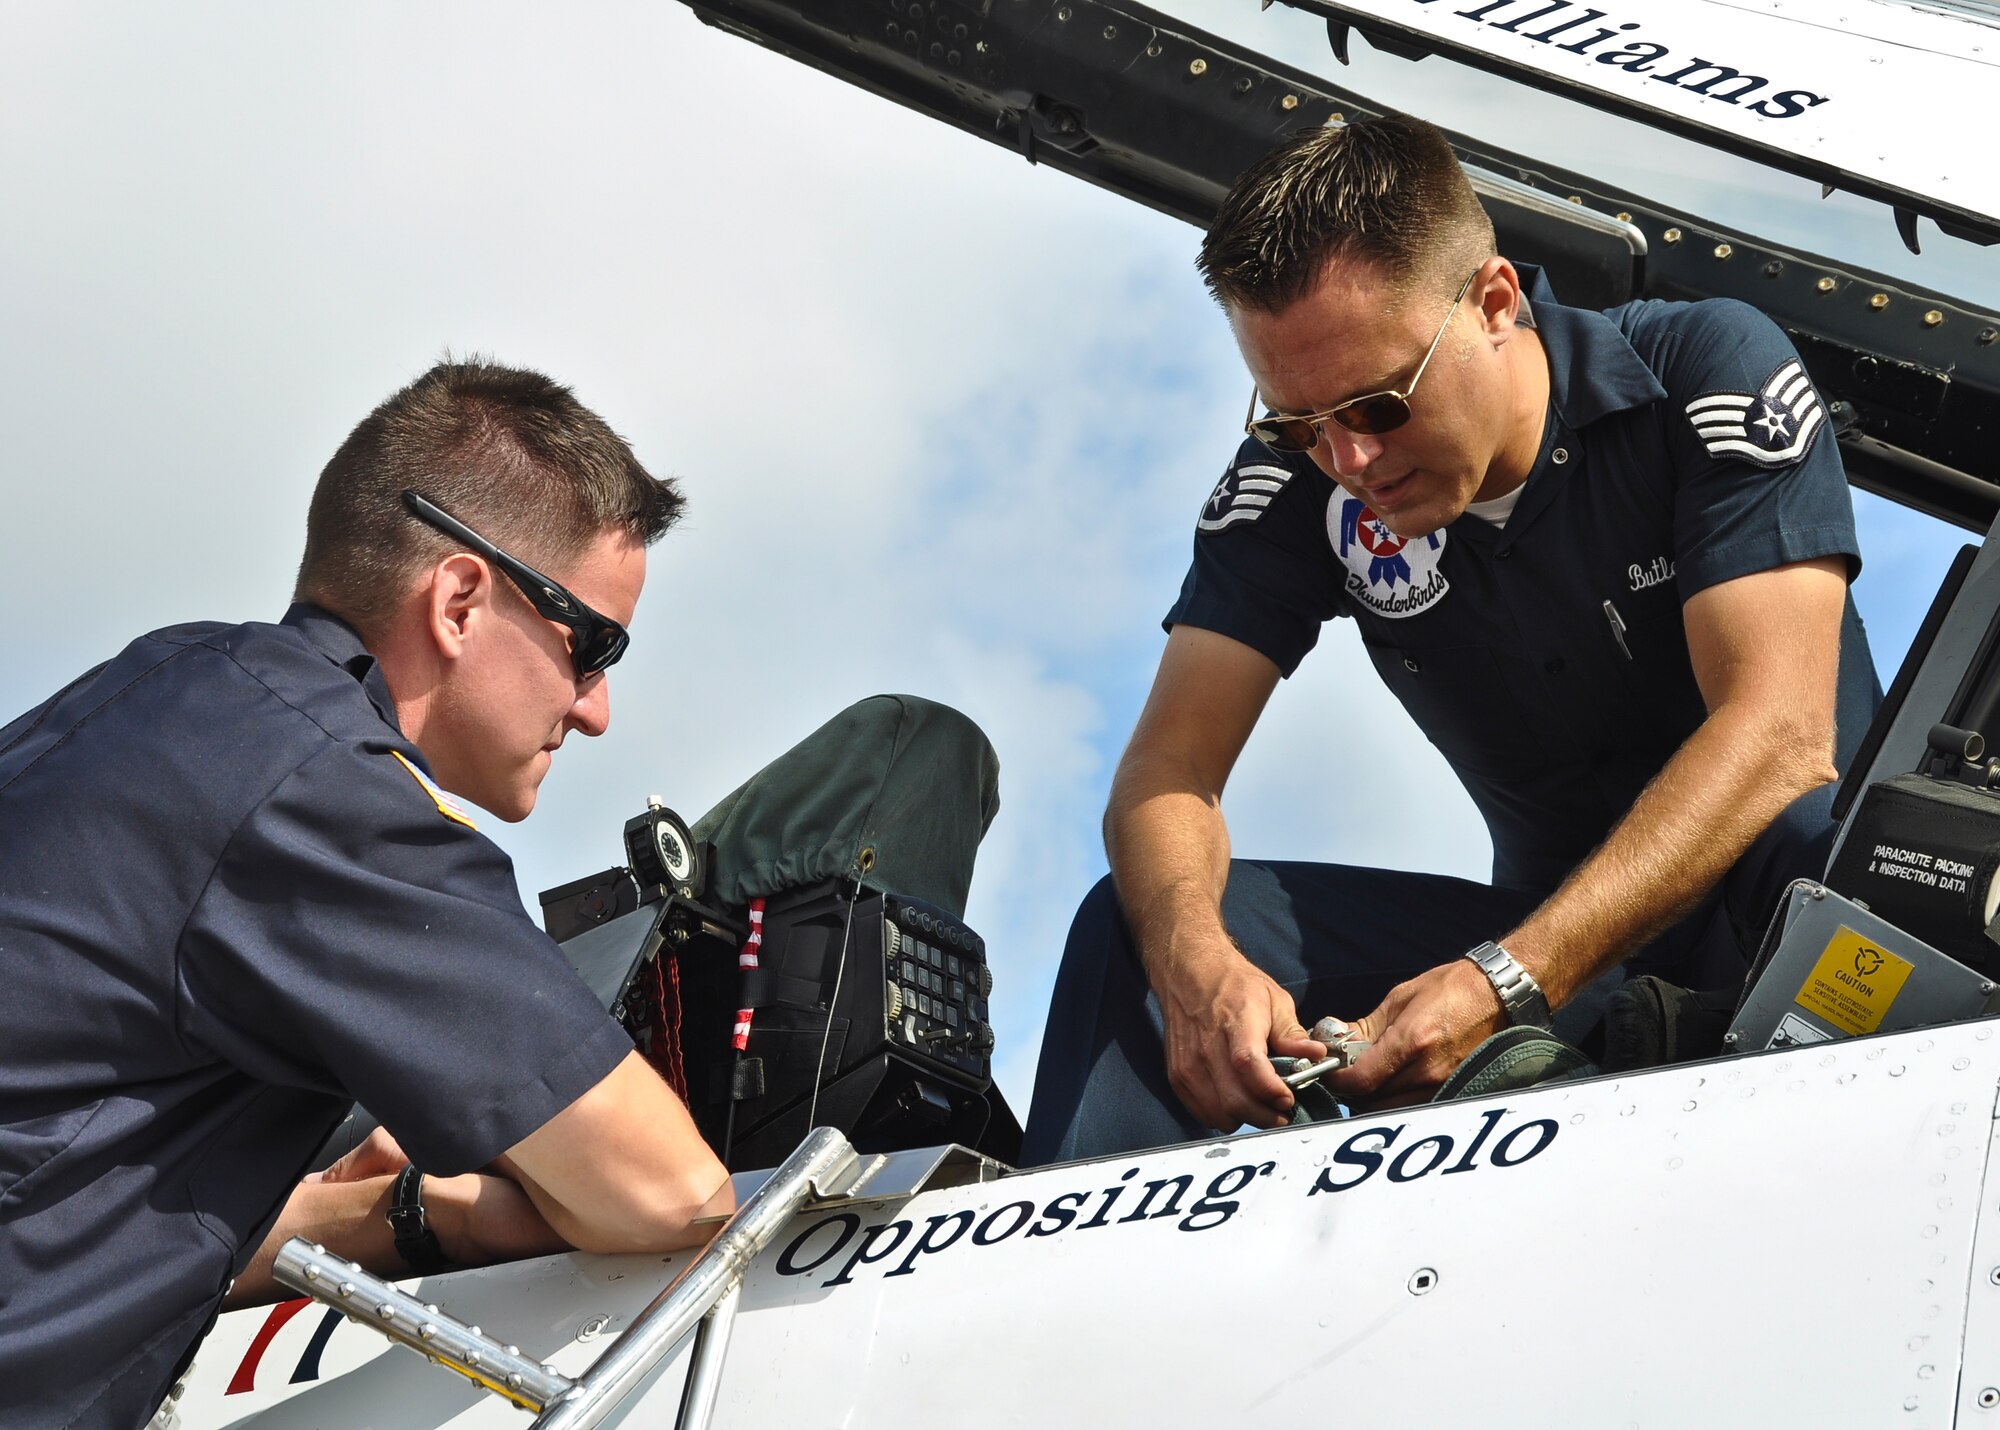 Air Force Staff Sgt. Brandon Gumm of the 128th Air Refueling Wing's fire department listens as Staff Sgt. Brad Butler, U.S. Air Force Thunderbird maintenance operation command, talks about the water retrieval methods of the aircraft’s pilot in the event of a mishap during the 2011 Milwaukee Air and Water Show.  The Thunderbirds are assigned to Nellis Air Force Base, Las Vegas, Nevada, and they perform 70 shows per year; the air demonstration team was officially established in 1953.  The Milwaukee Air and Water Show is a free event that took place at Milwaukee’s Bradford Beach on August 6 and 7.  (U.S. Air Force photo by Staff Sgt. Jeremy Wilson / Released)